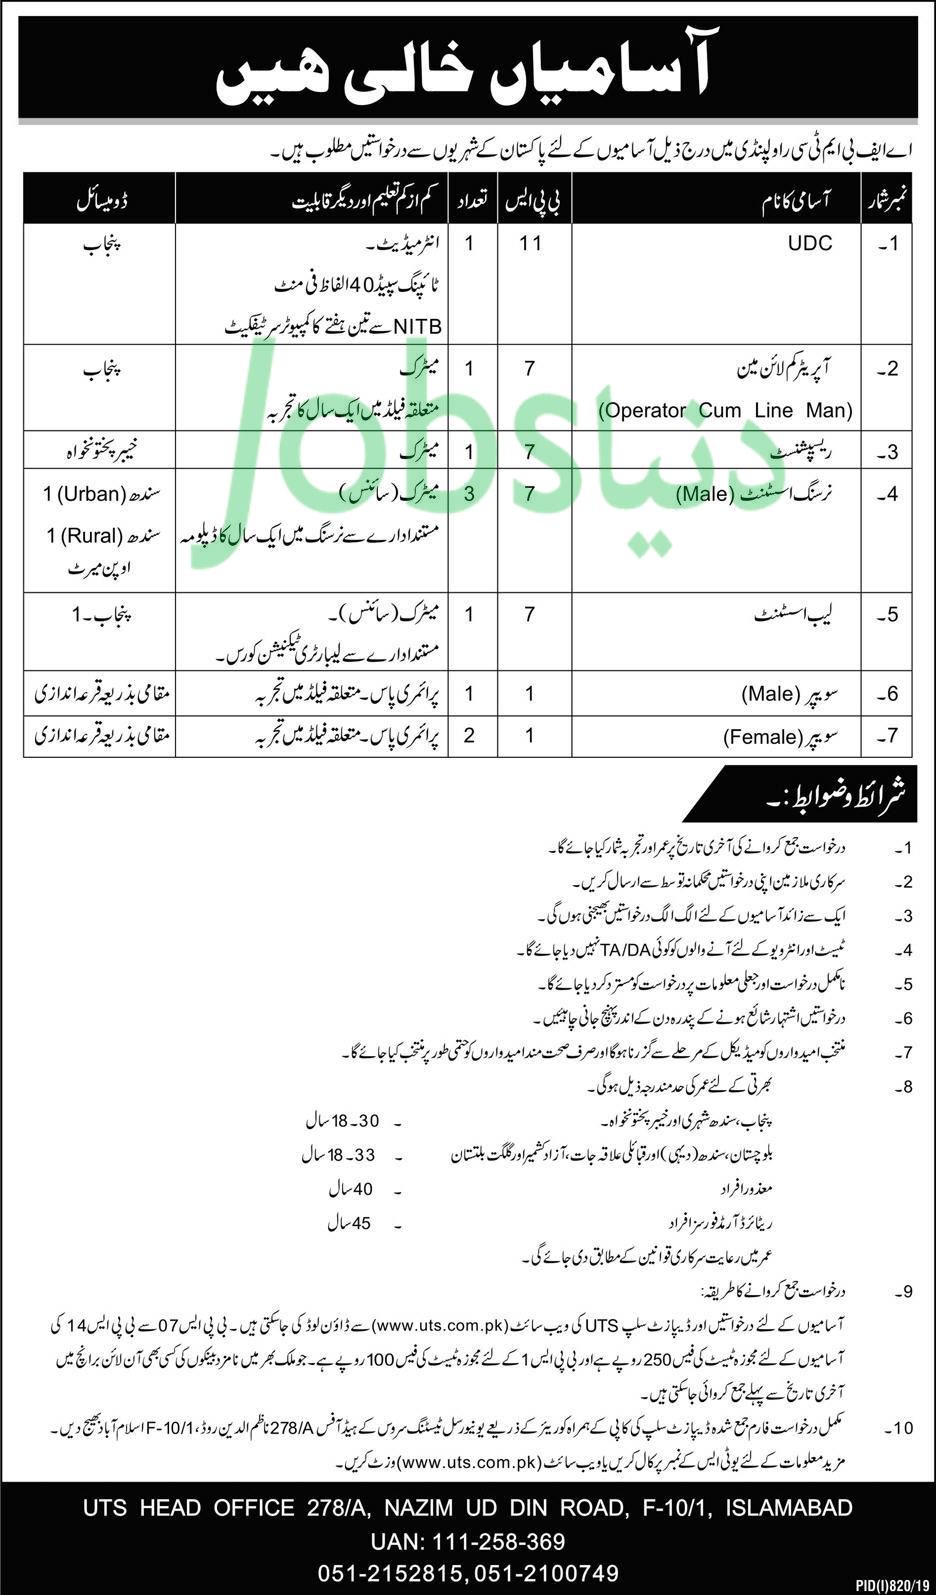 Armed Forces MBTC Institute Rawalpindi Jobs 2019 for UDC, Receptionist, Operator, Nursing & Support Staff